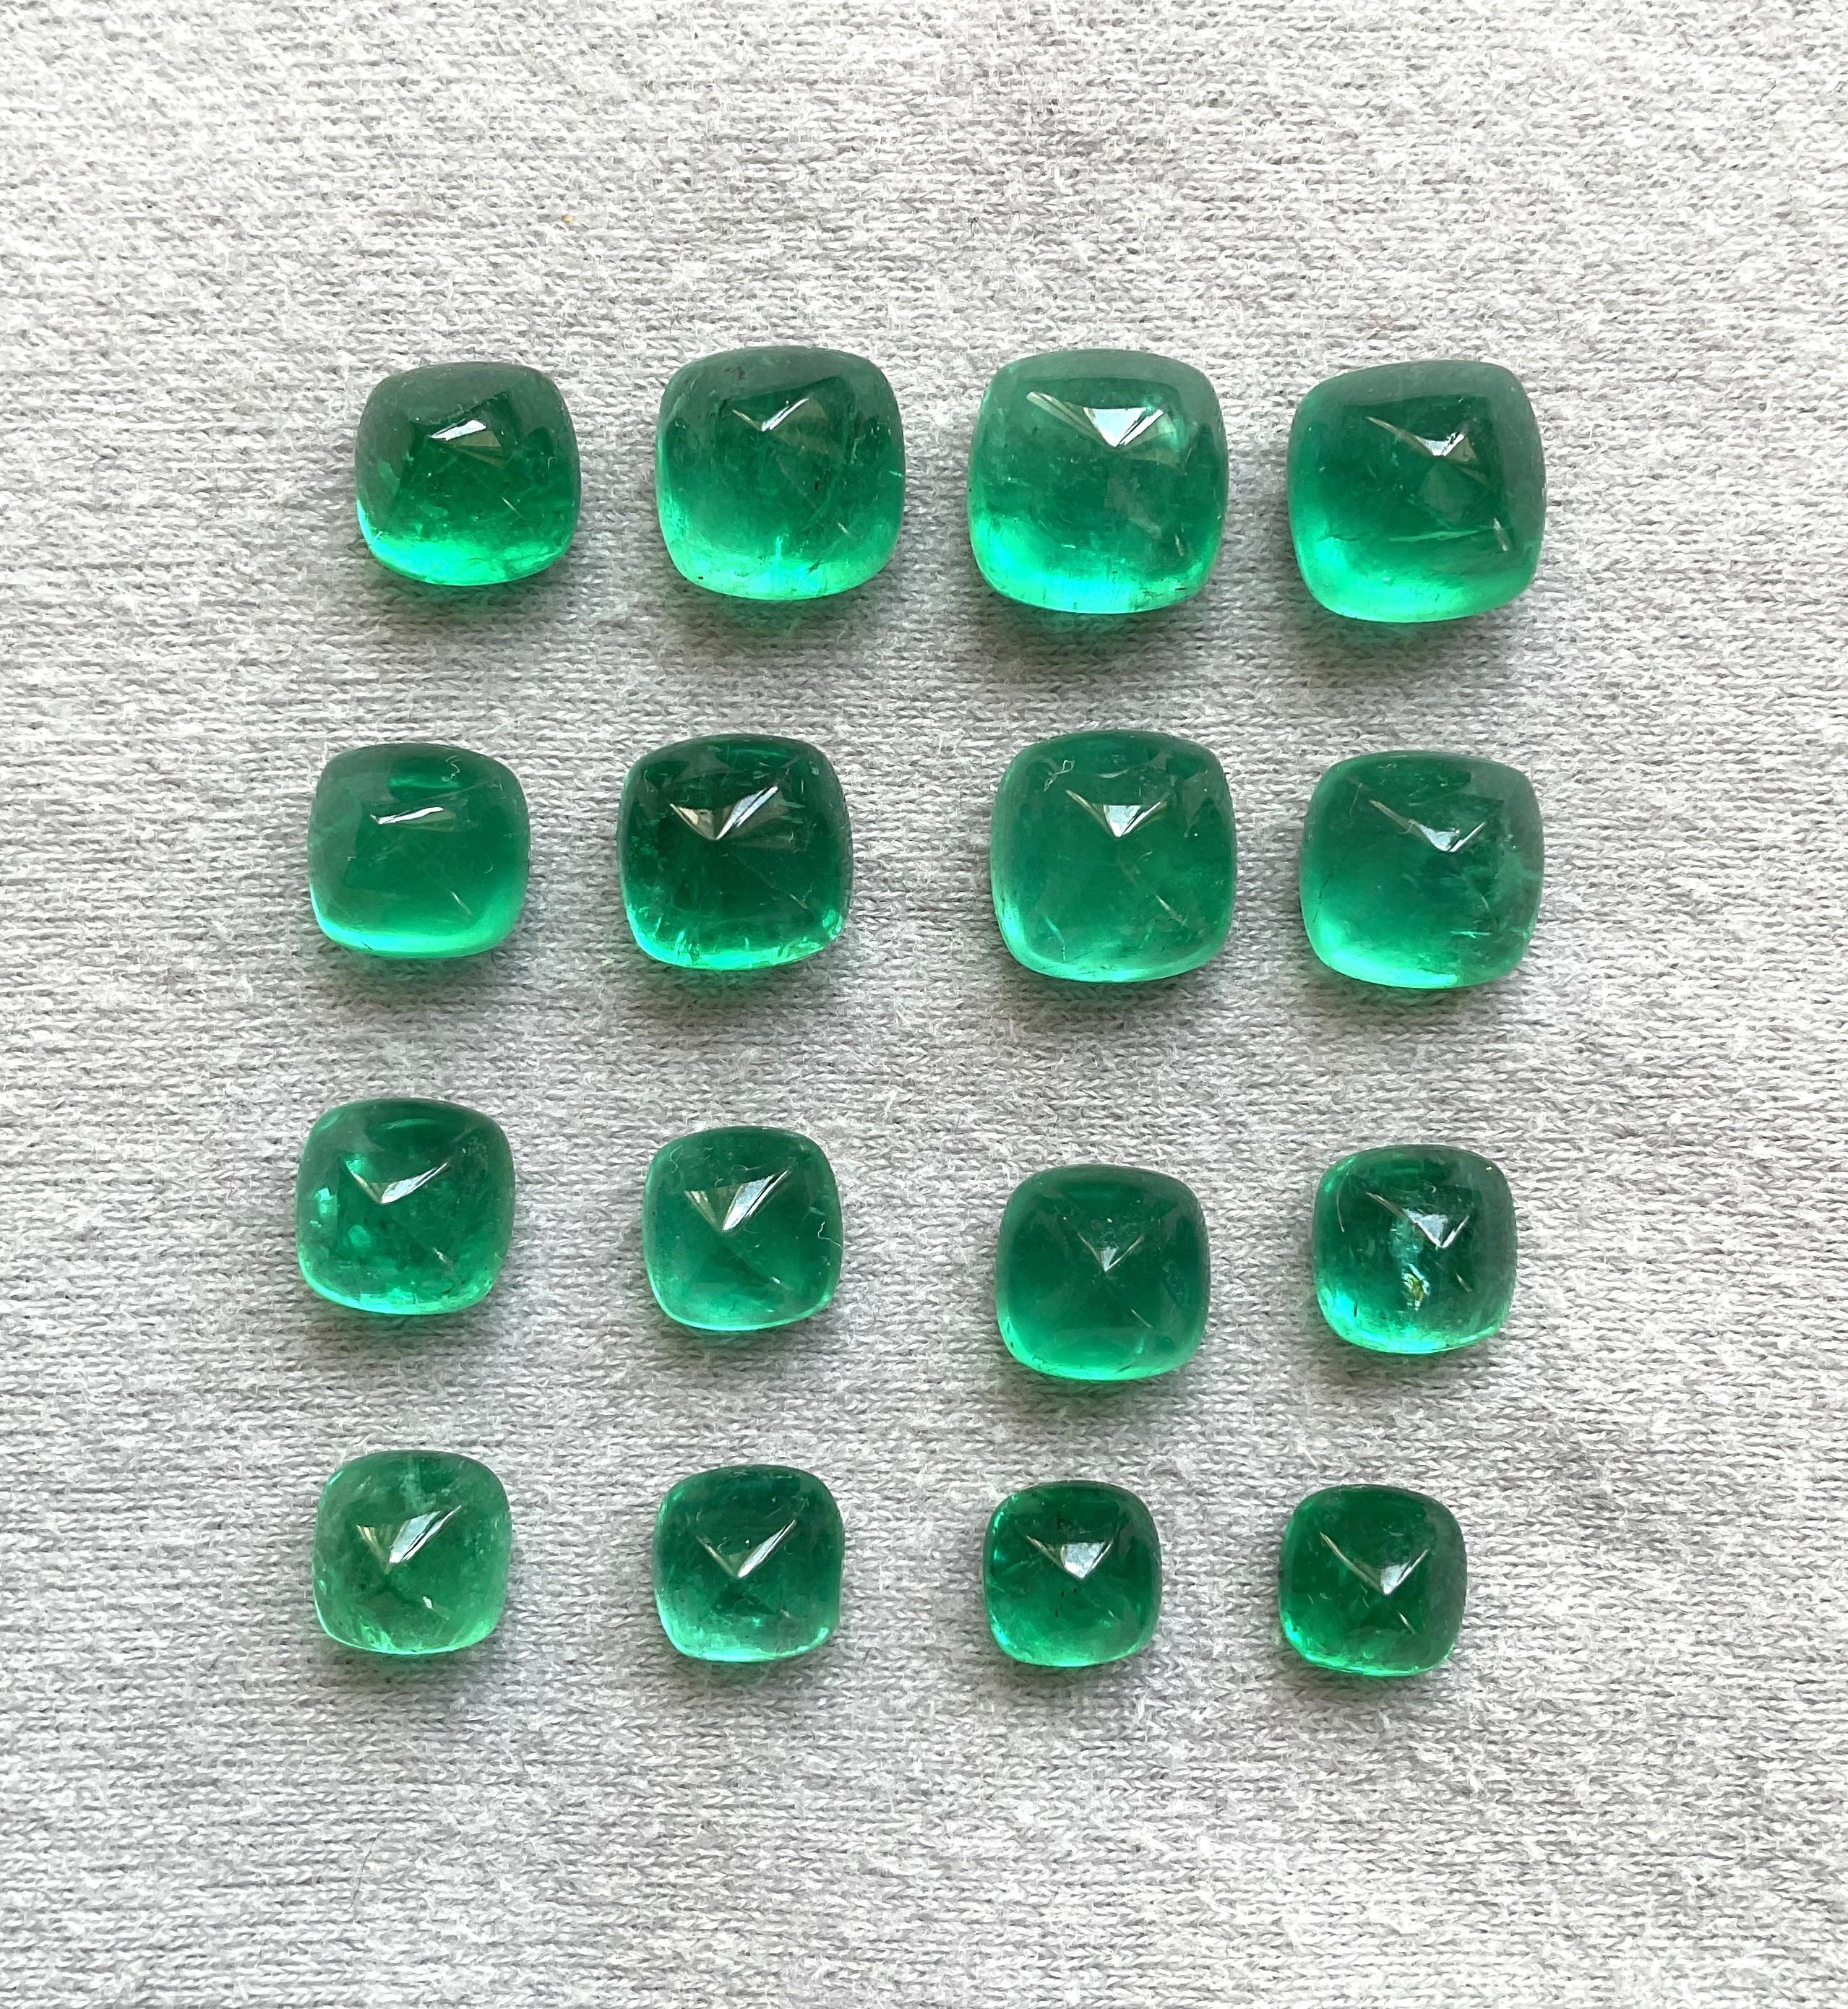 Art Deco 59.30 Carats Zambian Emerald Sugarloaf Cabochon Lot Top Quality Natural Gemstone For Sale